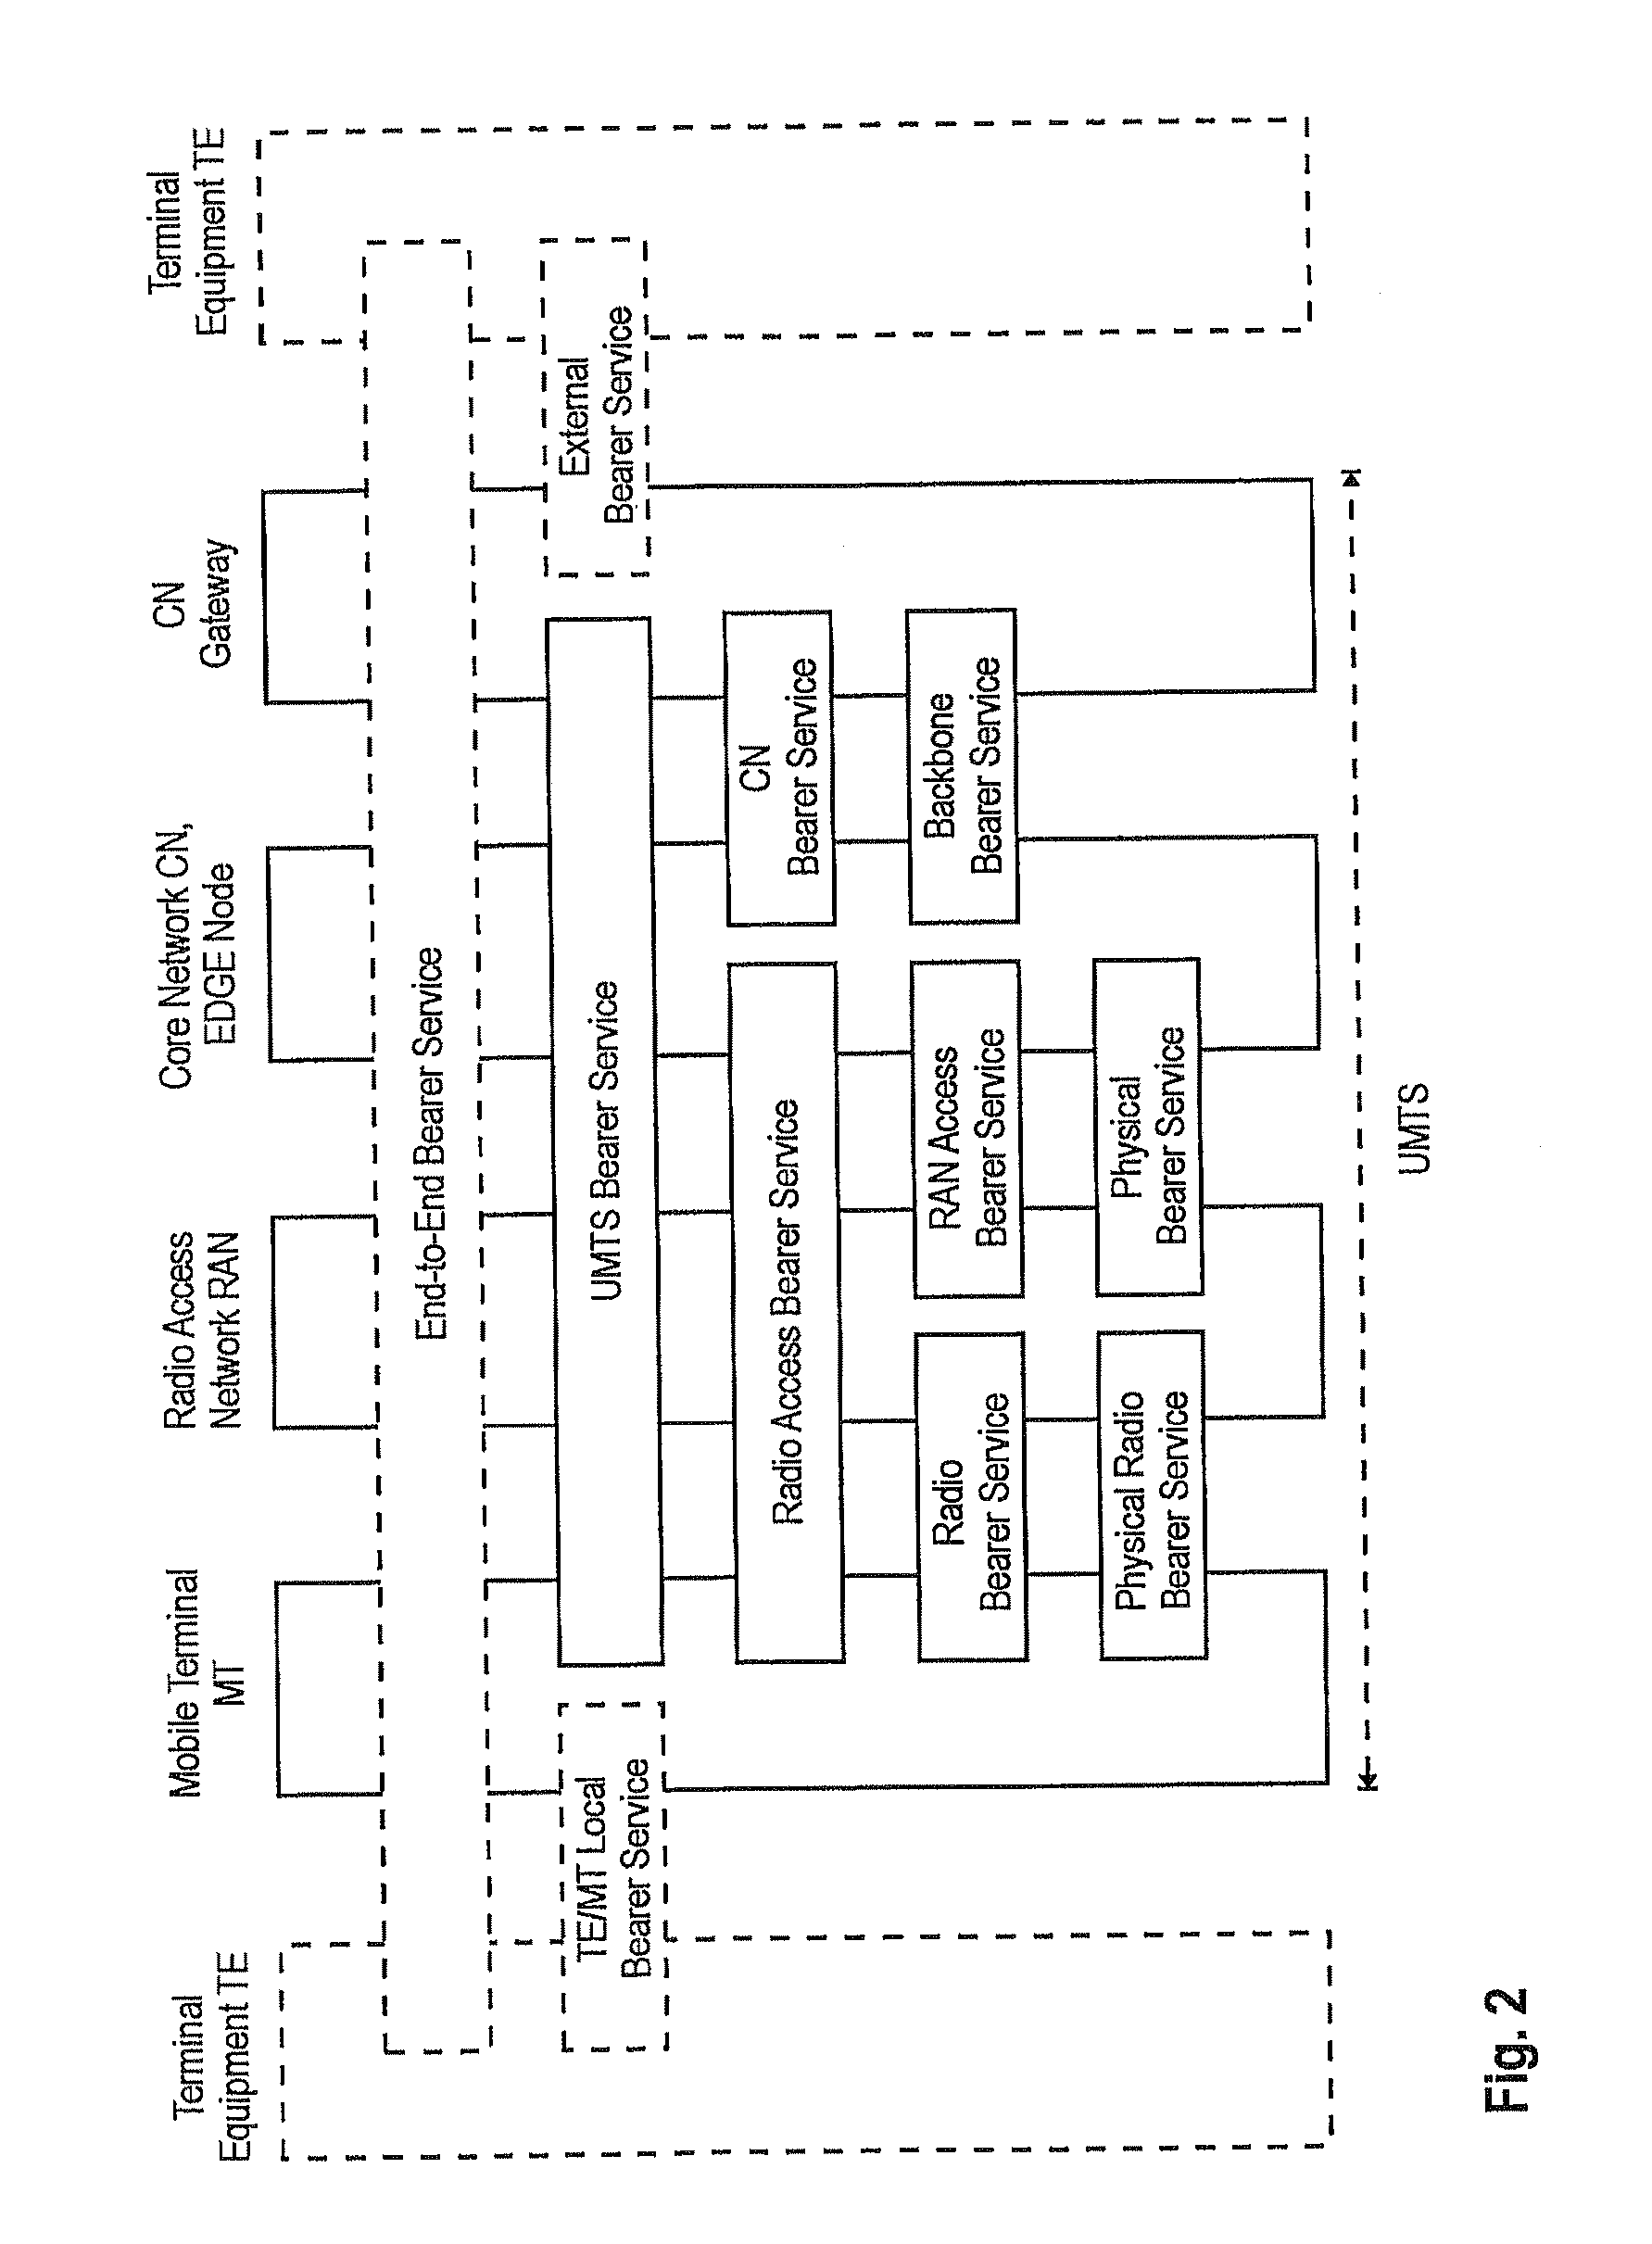 Providing Information On The Individual Bearers' Relationships To Mobile Terminals Receiving A Multicast Or Broadcast Service